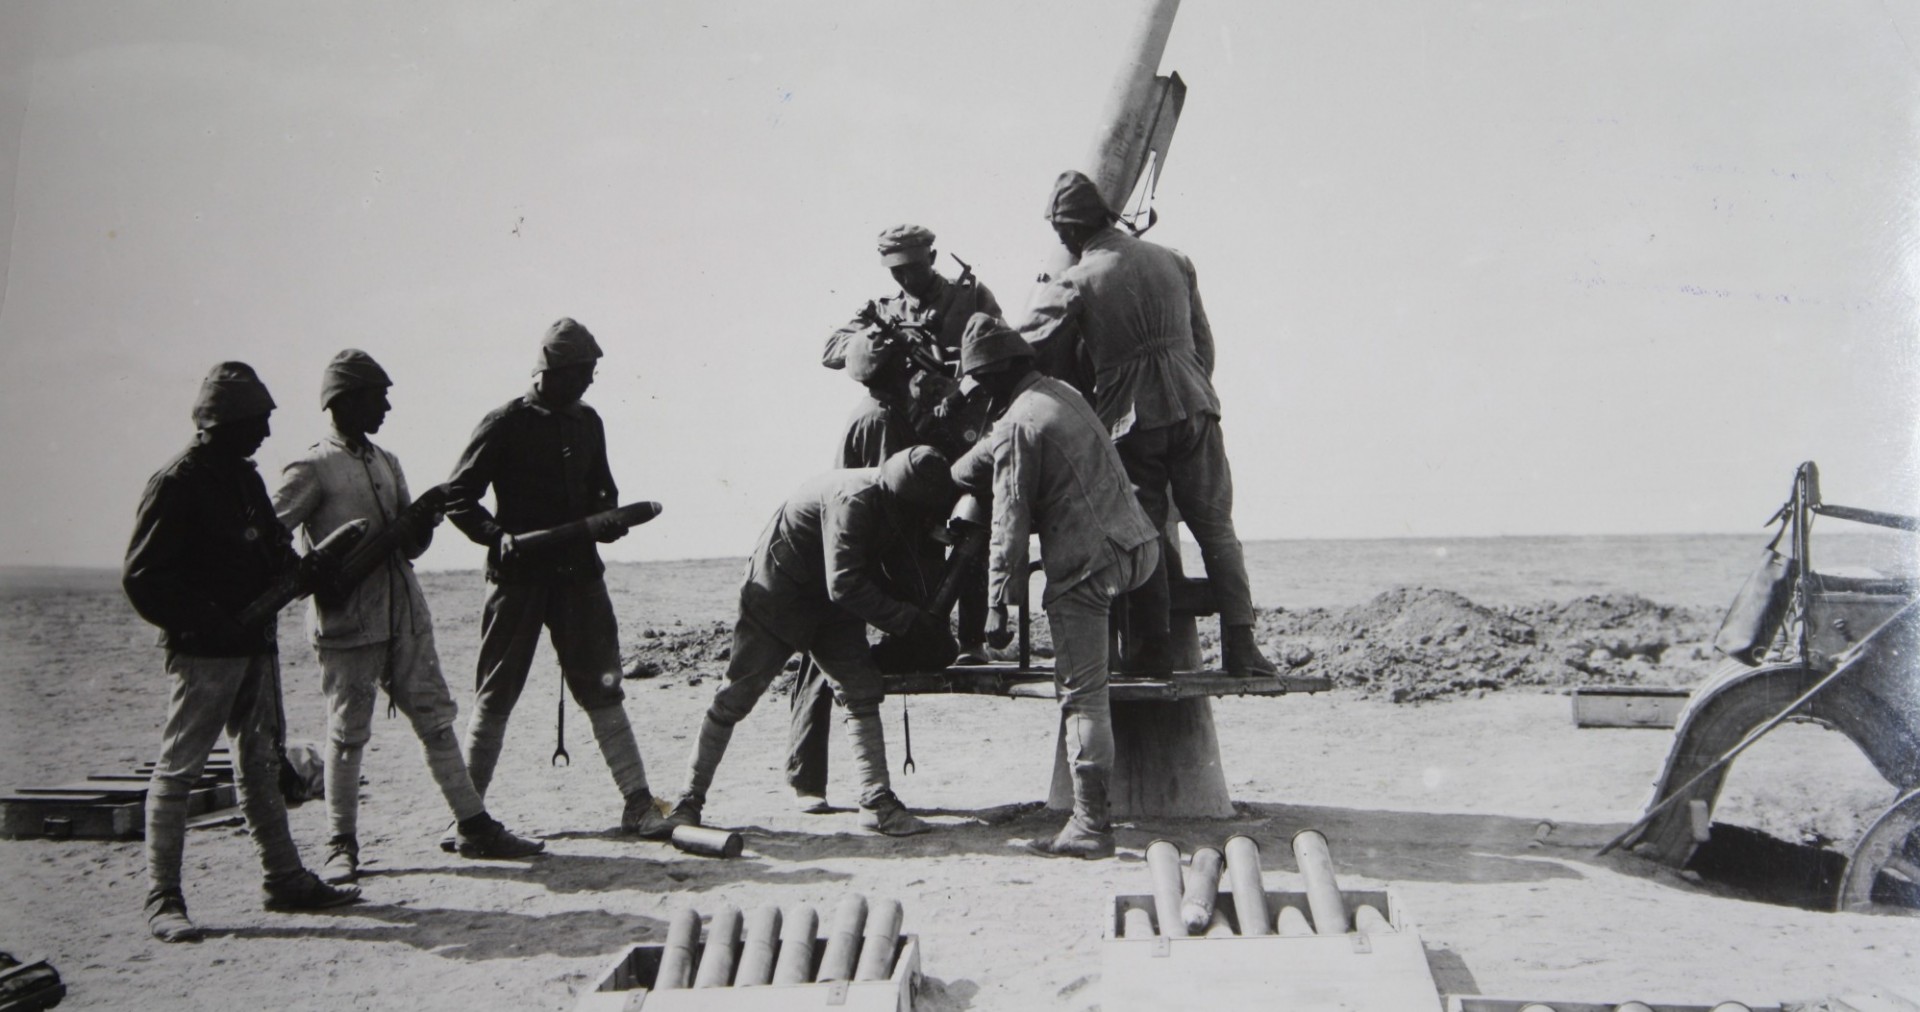 First World War in Israel. Source: National Library of Israel, Public domain.